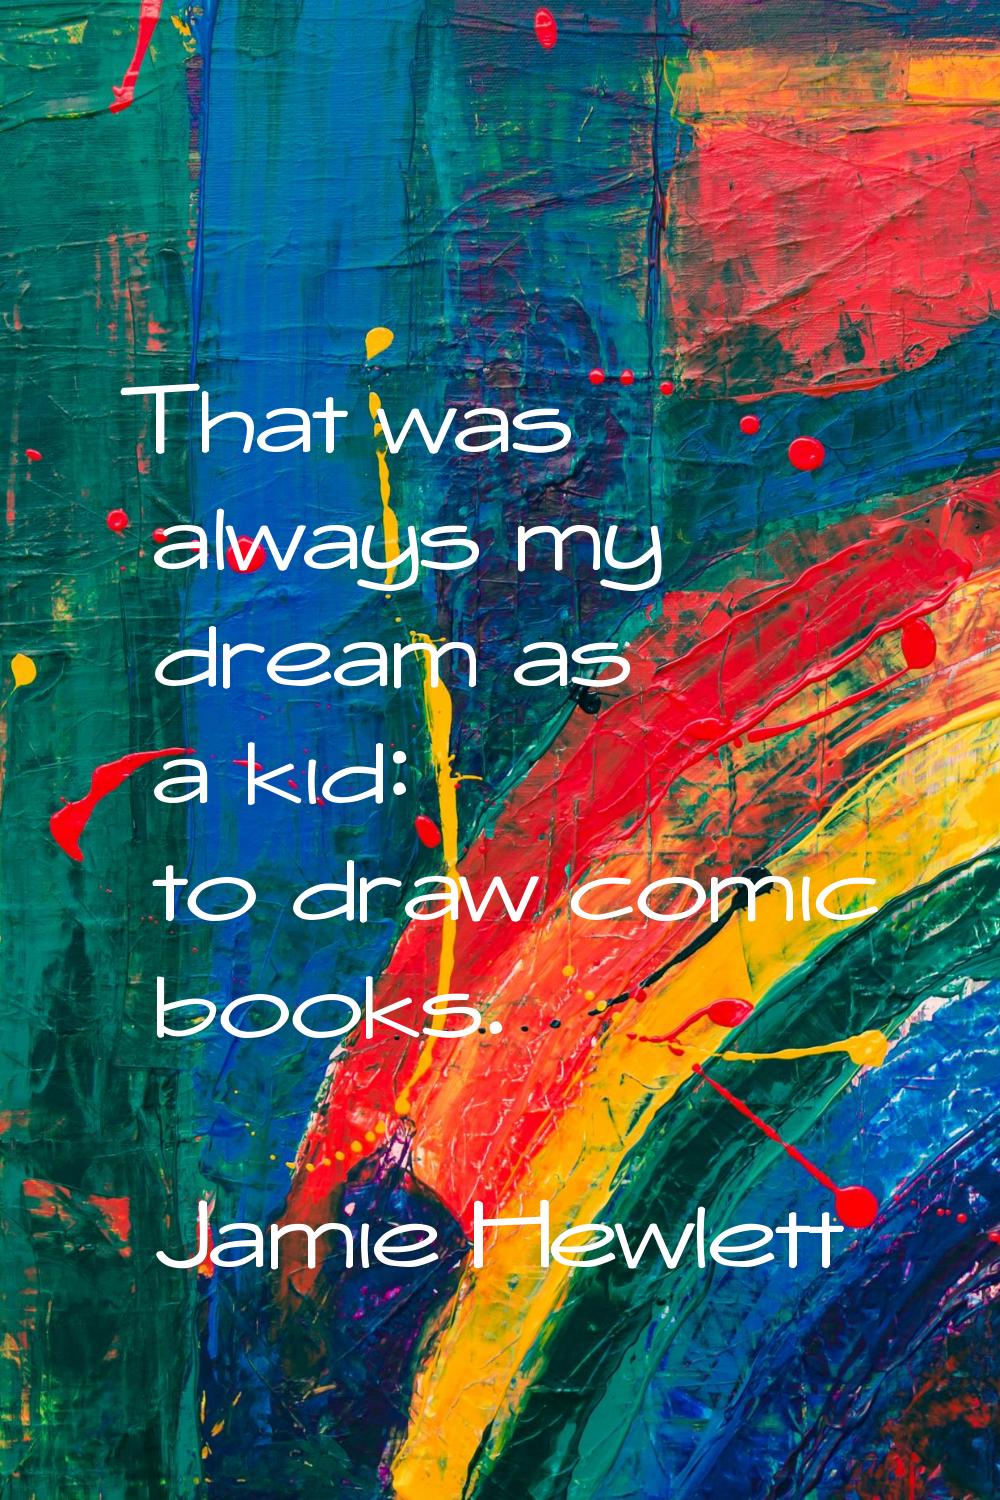 That was always my dream as a kid: to draw comic books.